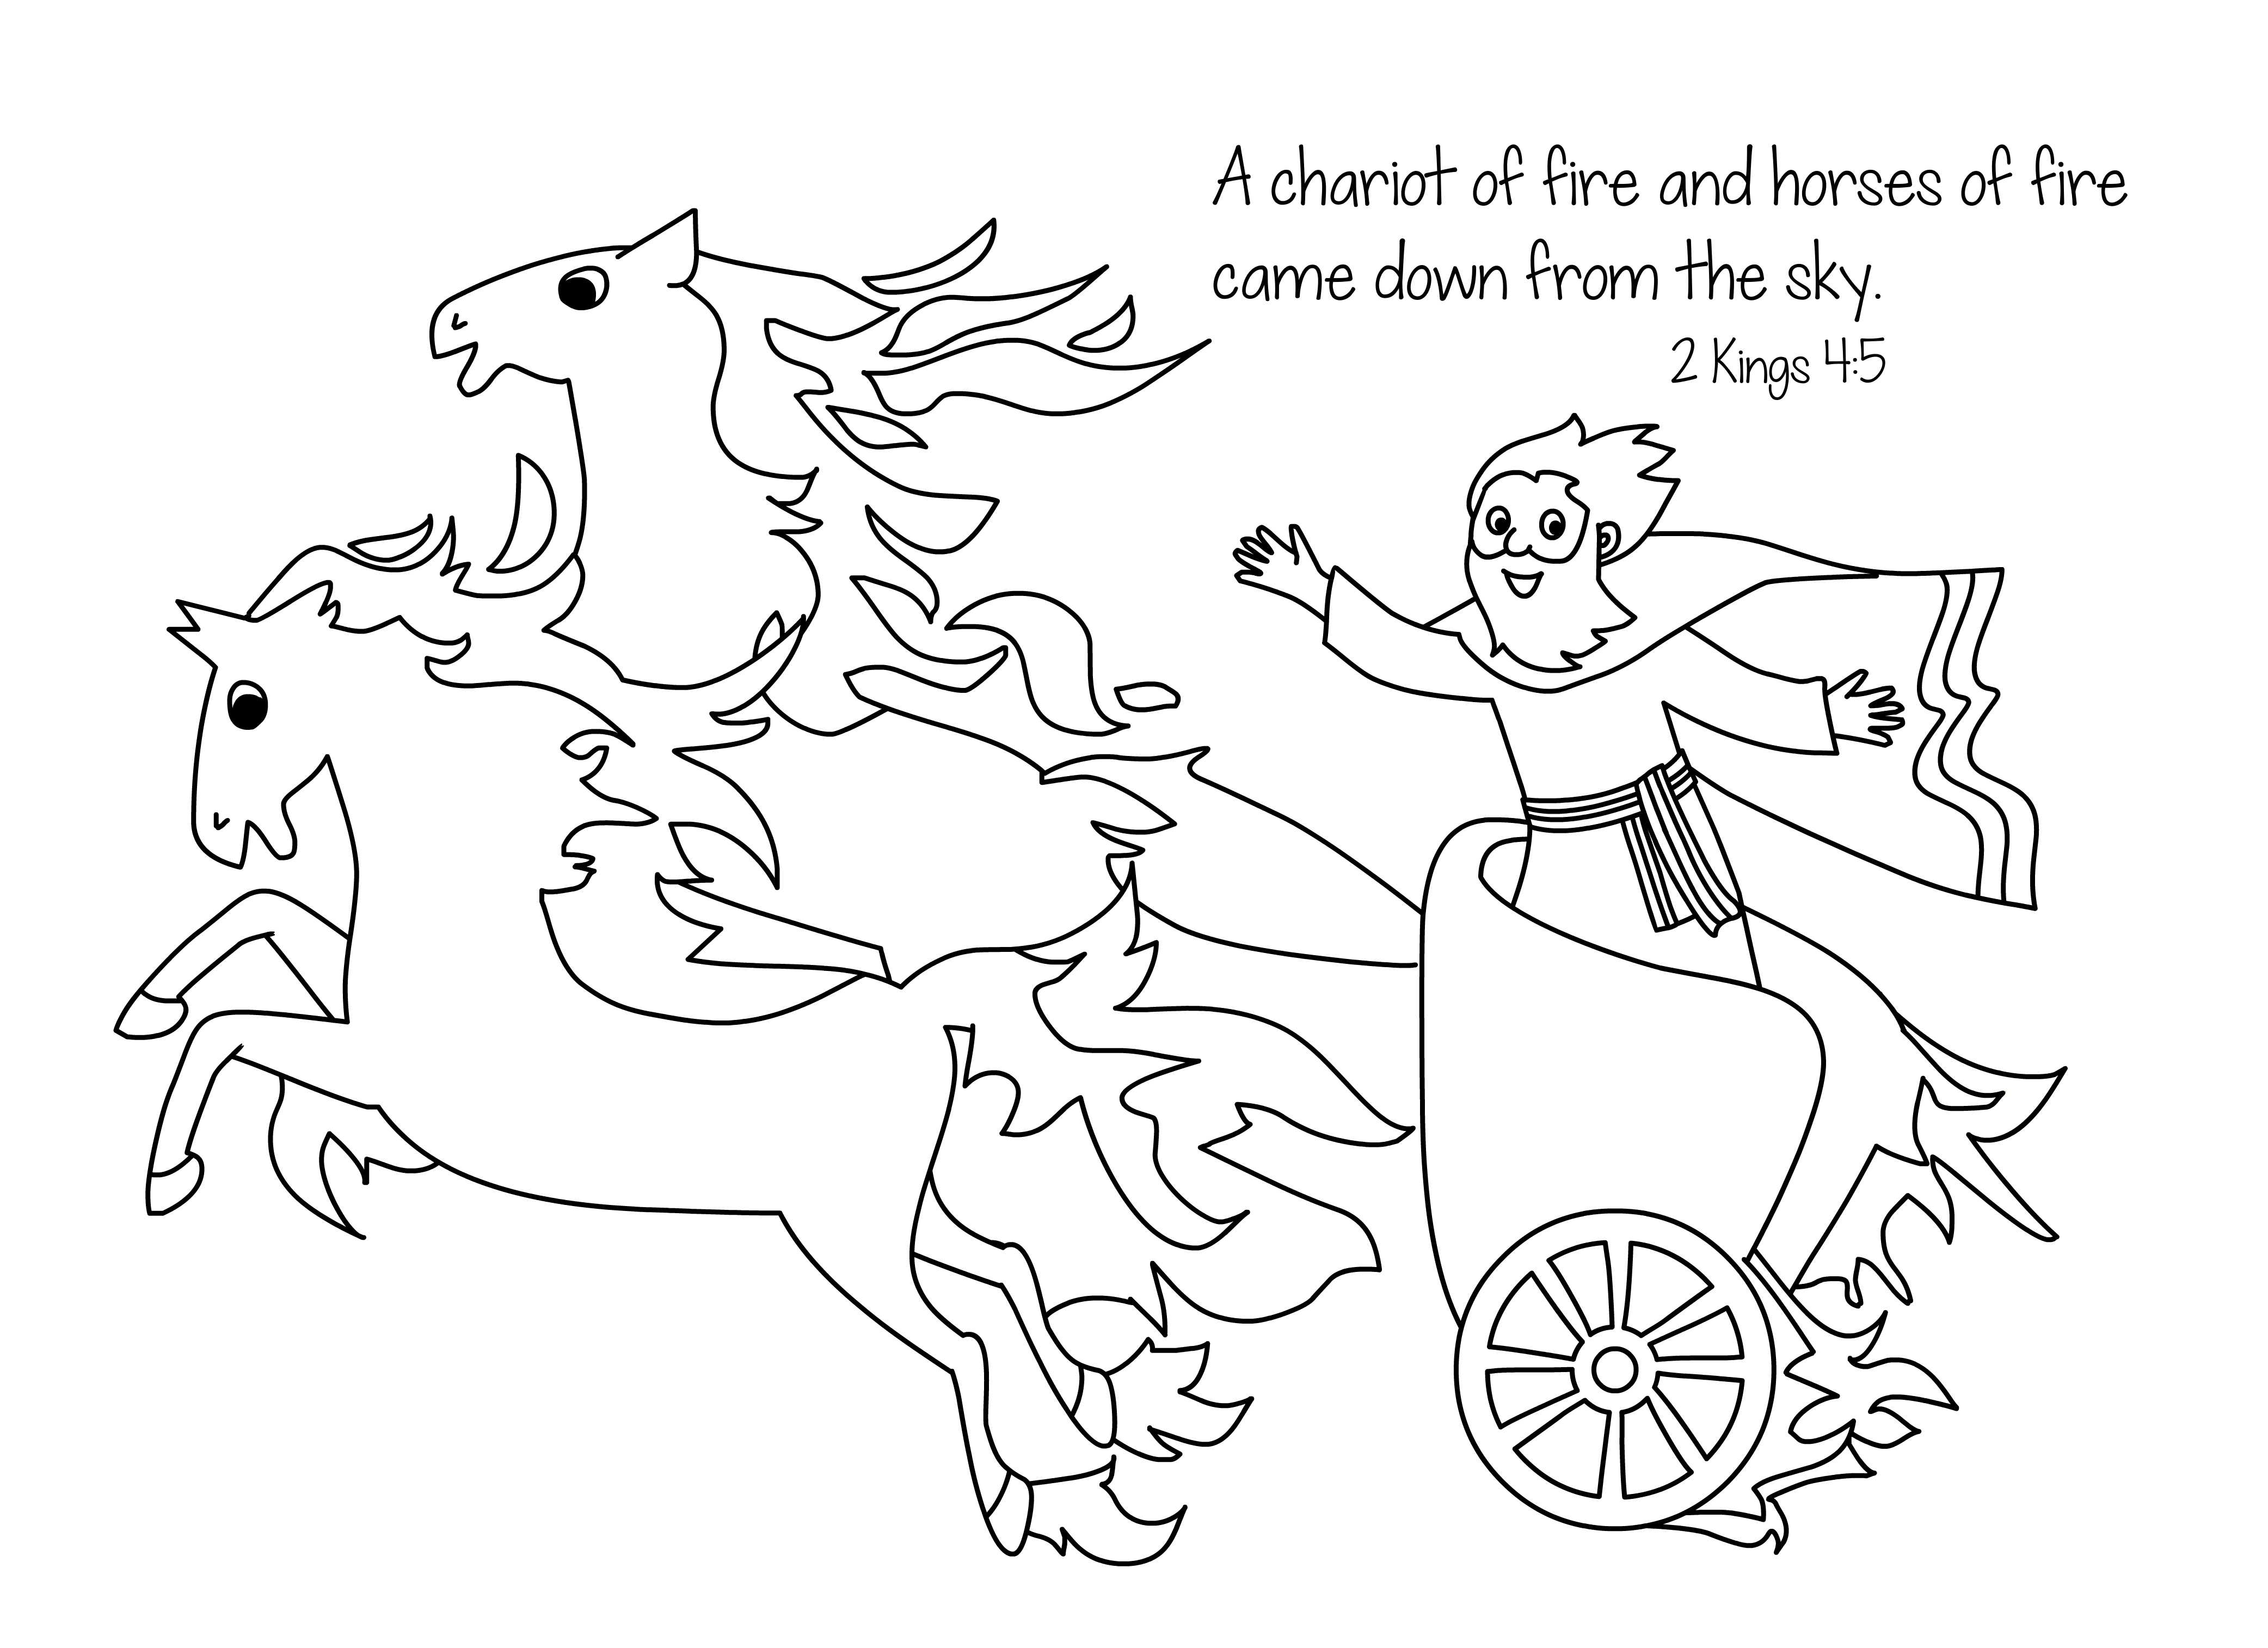 Chariot of fire BW